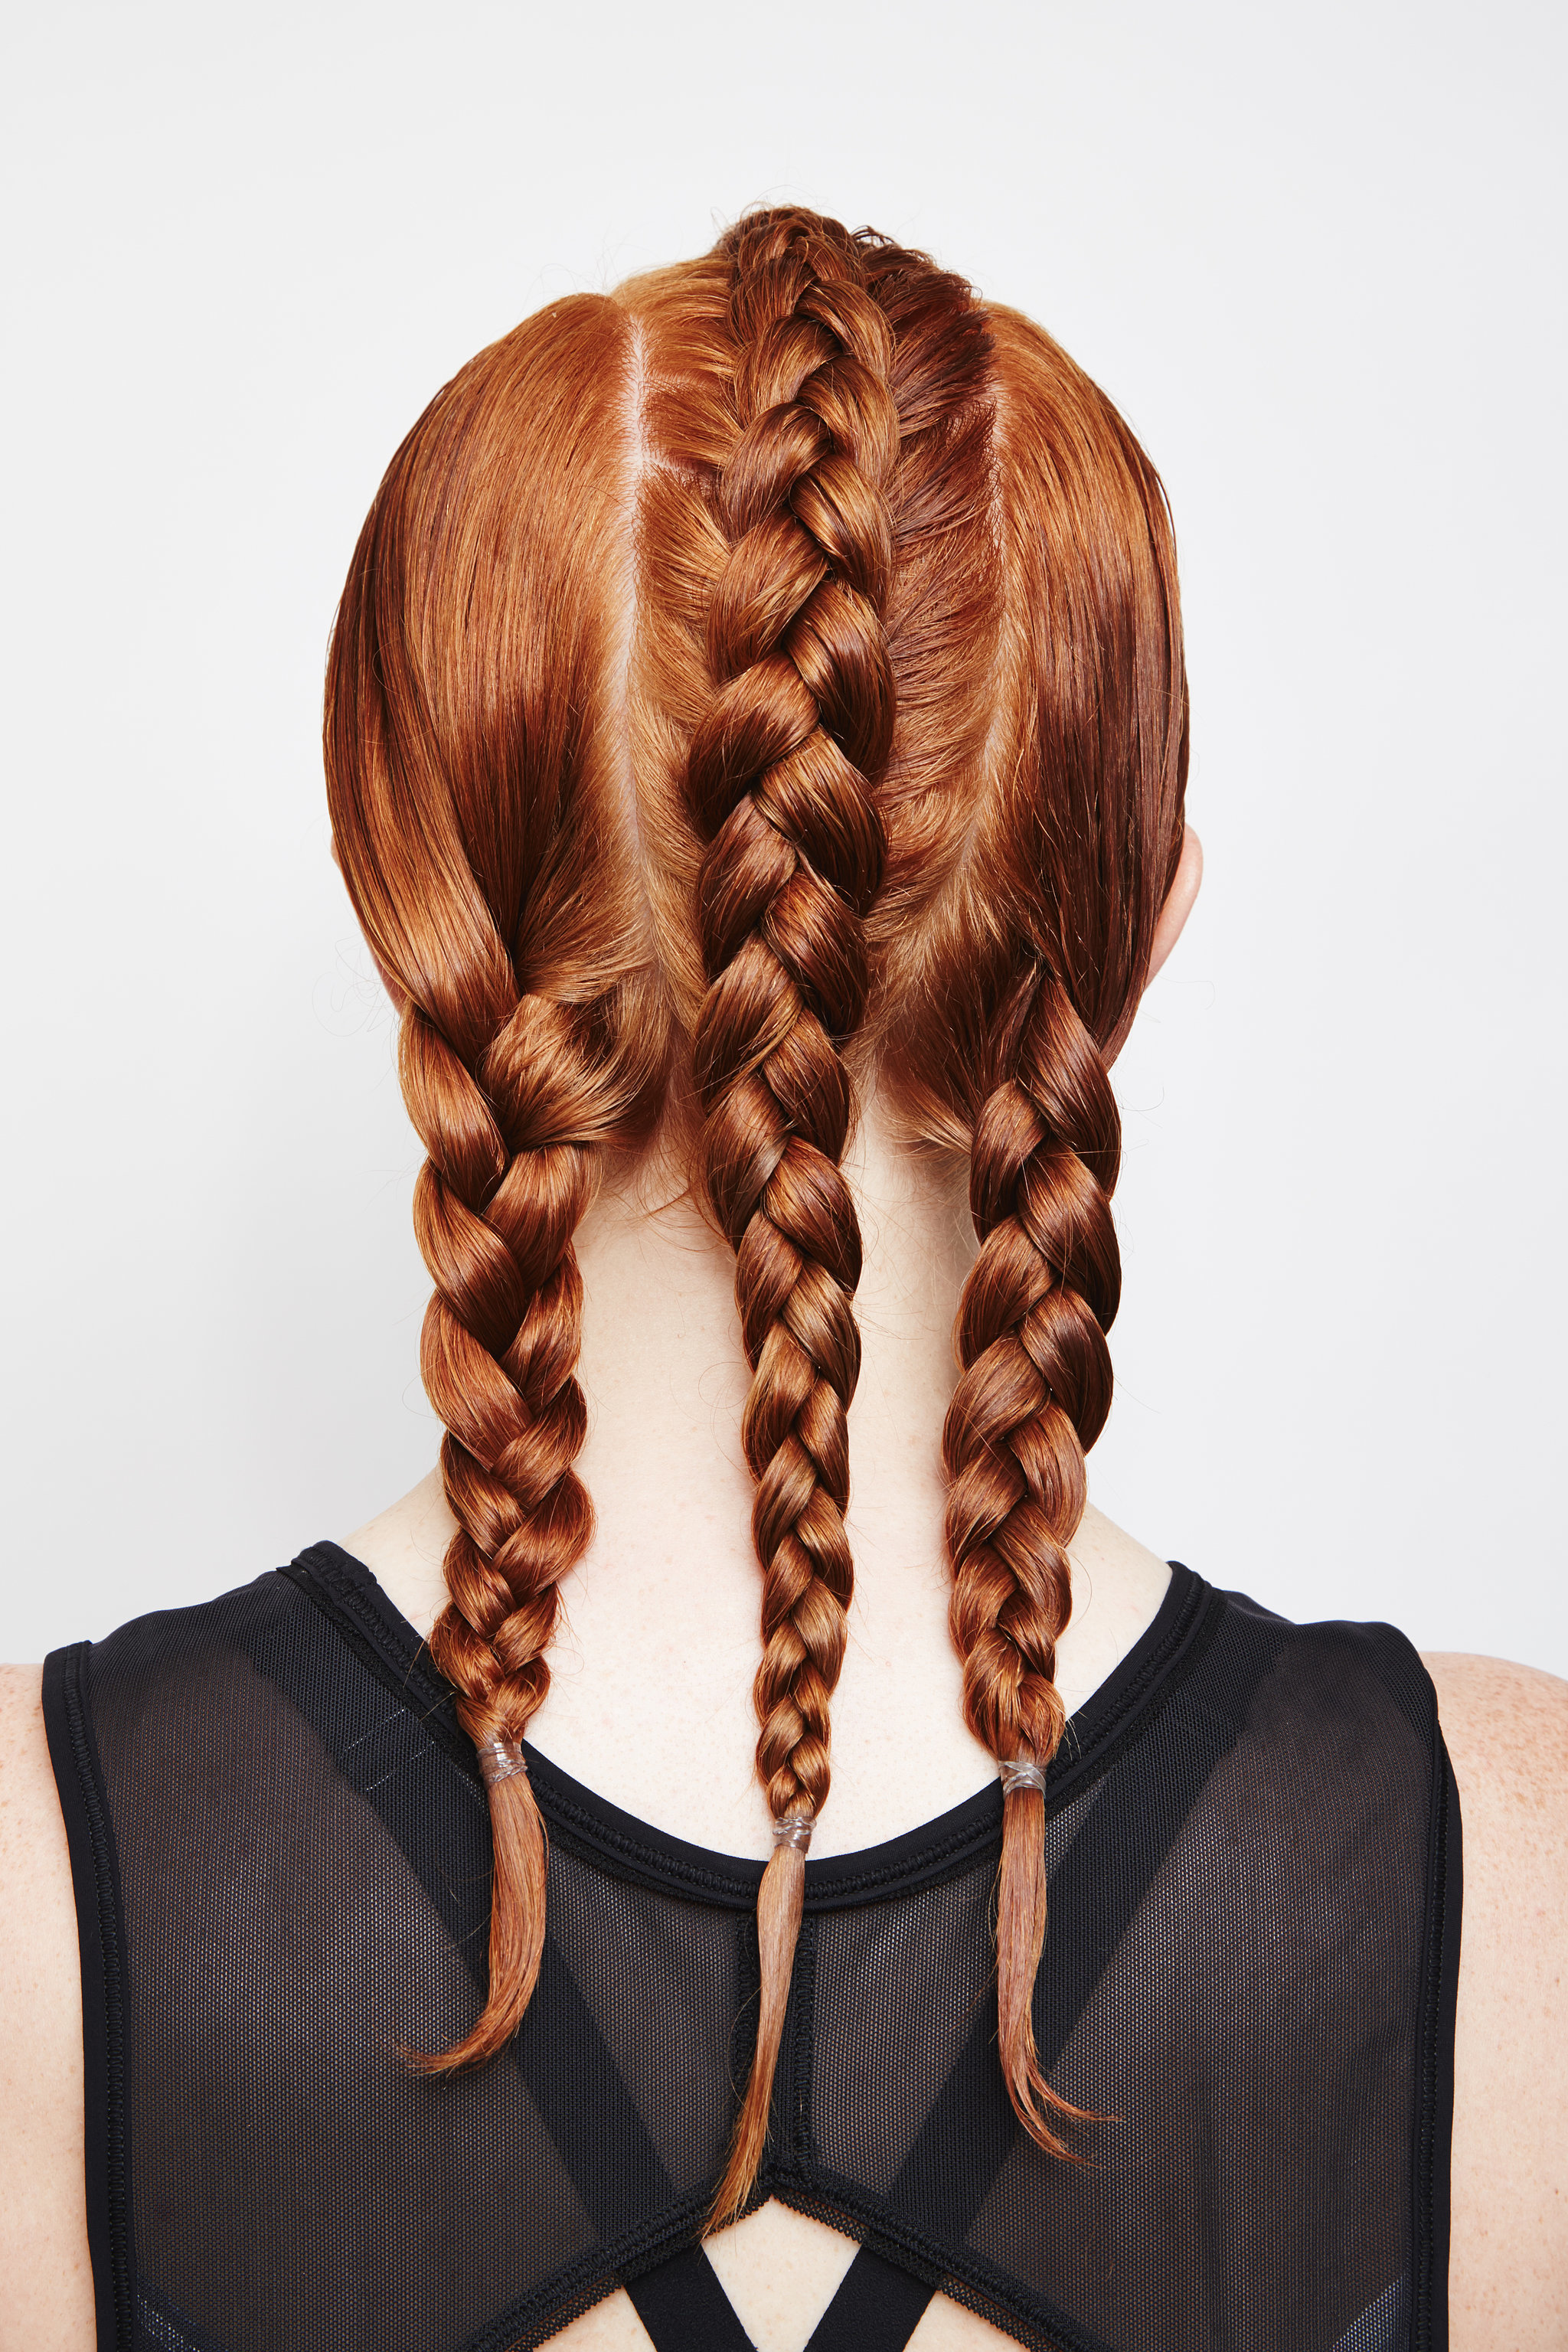 This Dutch French Braided Mohawk Will Make You Look Badass